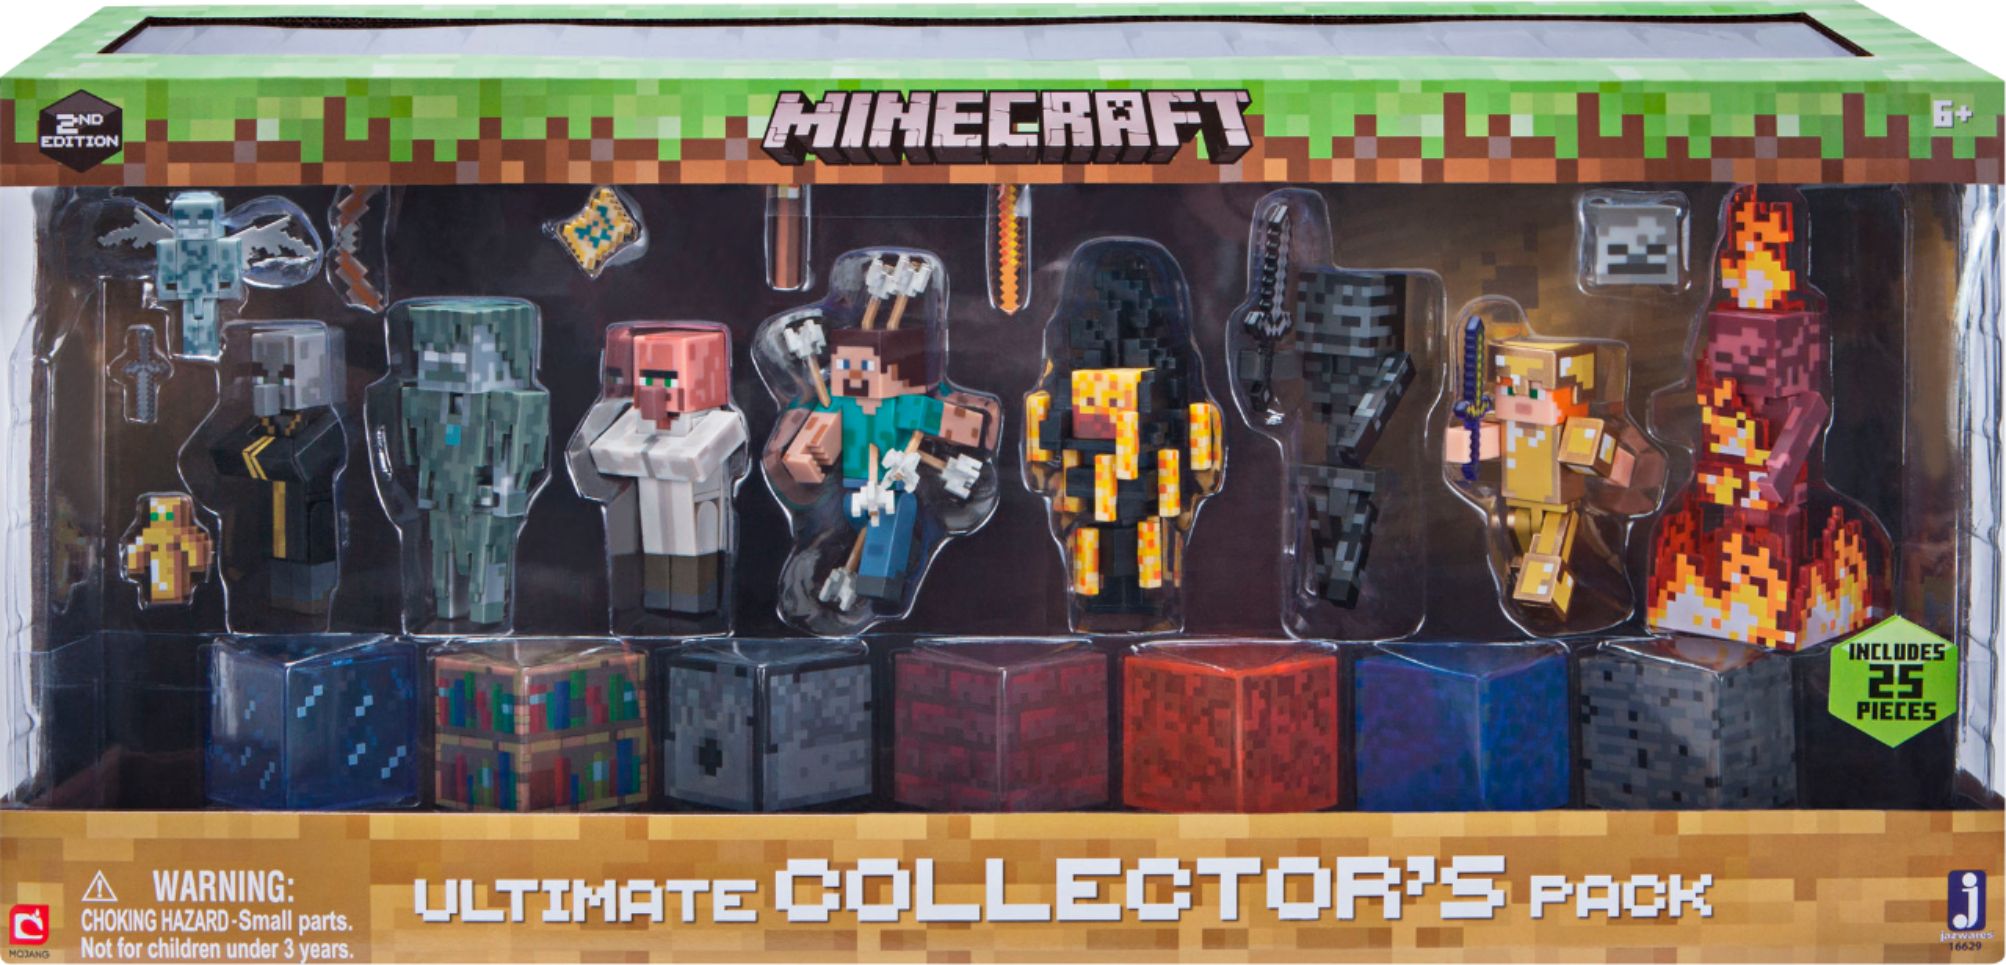 Questions and Answers: Jazwares Minecraft Ultimate Collector's Pack ...